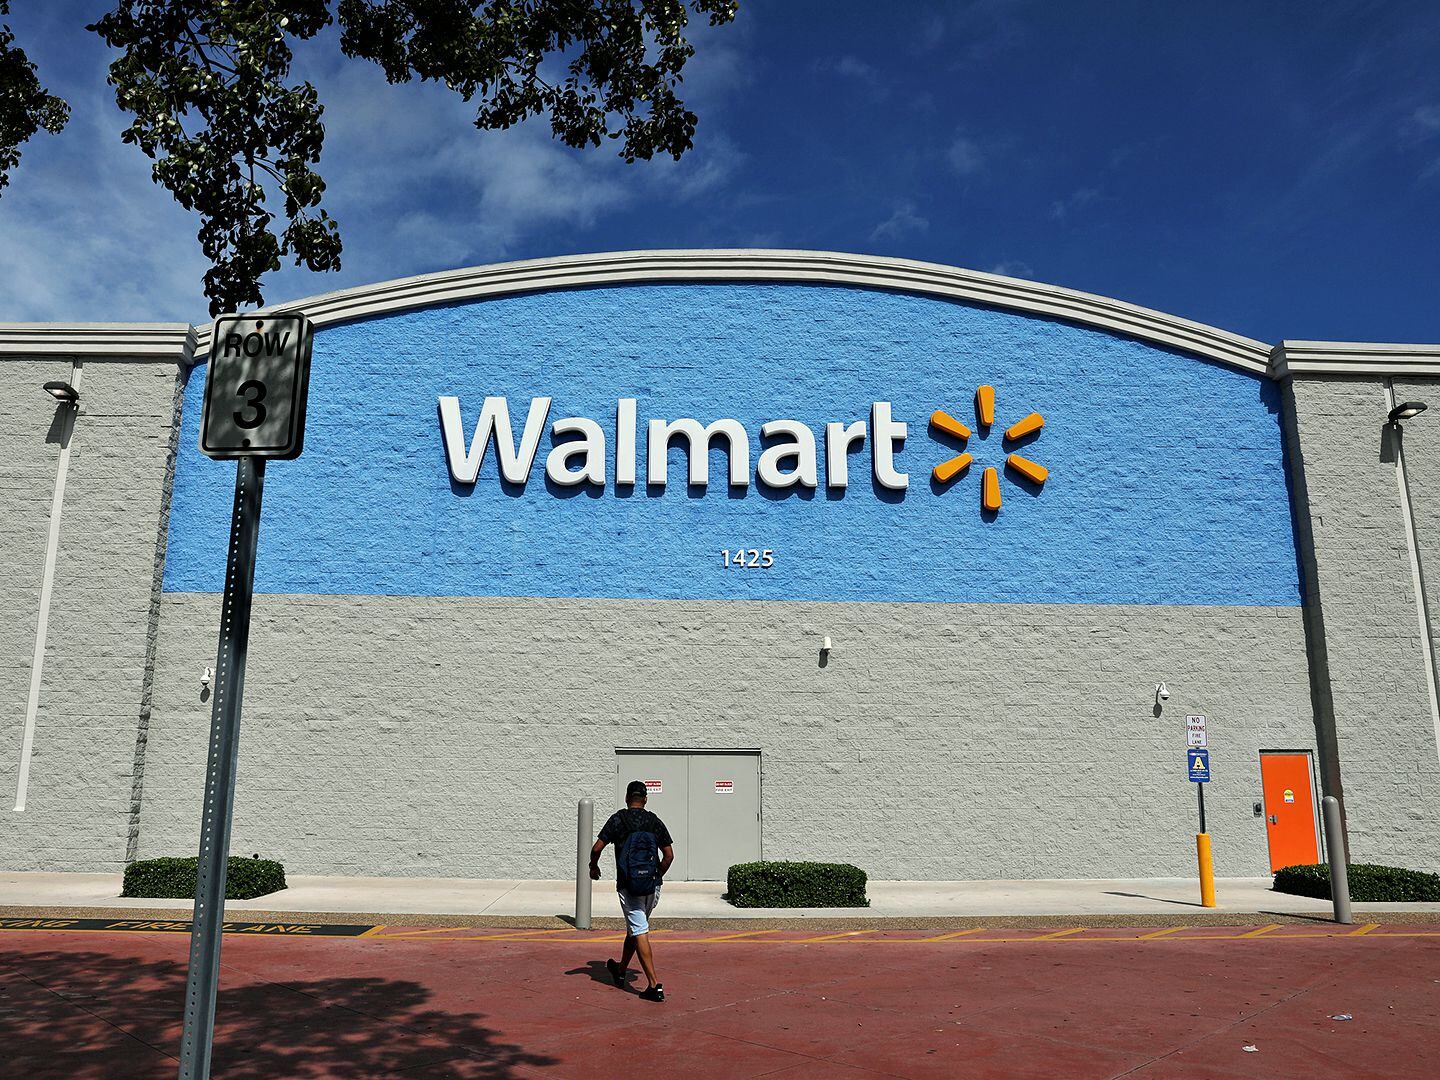 Why Walmart entering Roblox is a lesson in metaverse marketing